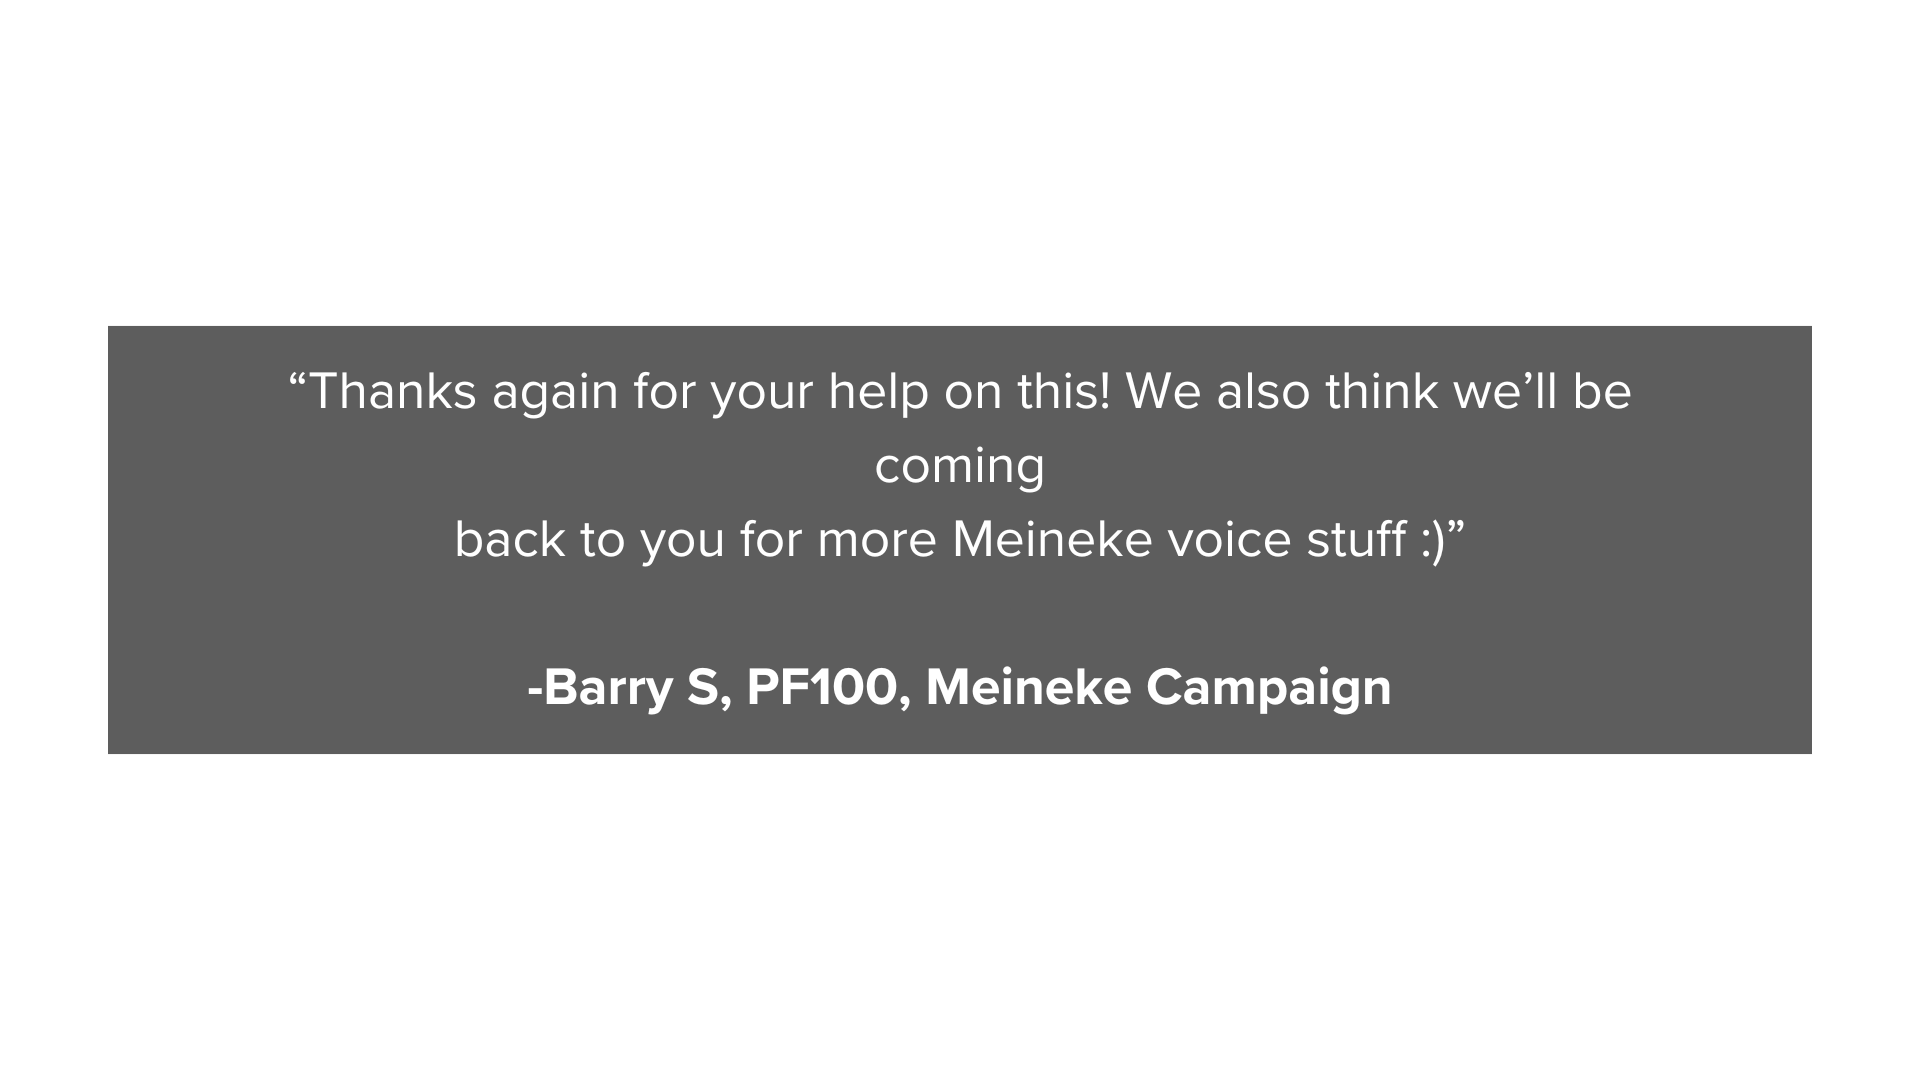 “Thanks again for your help on this! We also think we’ll be coming back to you for more Meineke voice stuff )” -Barry S, PF100, Meineke Campaign (3).png